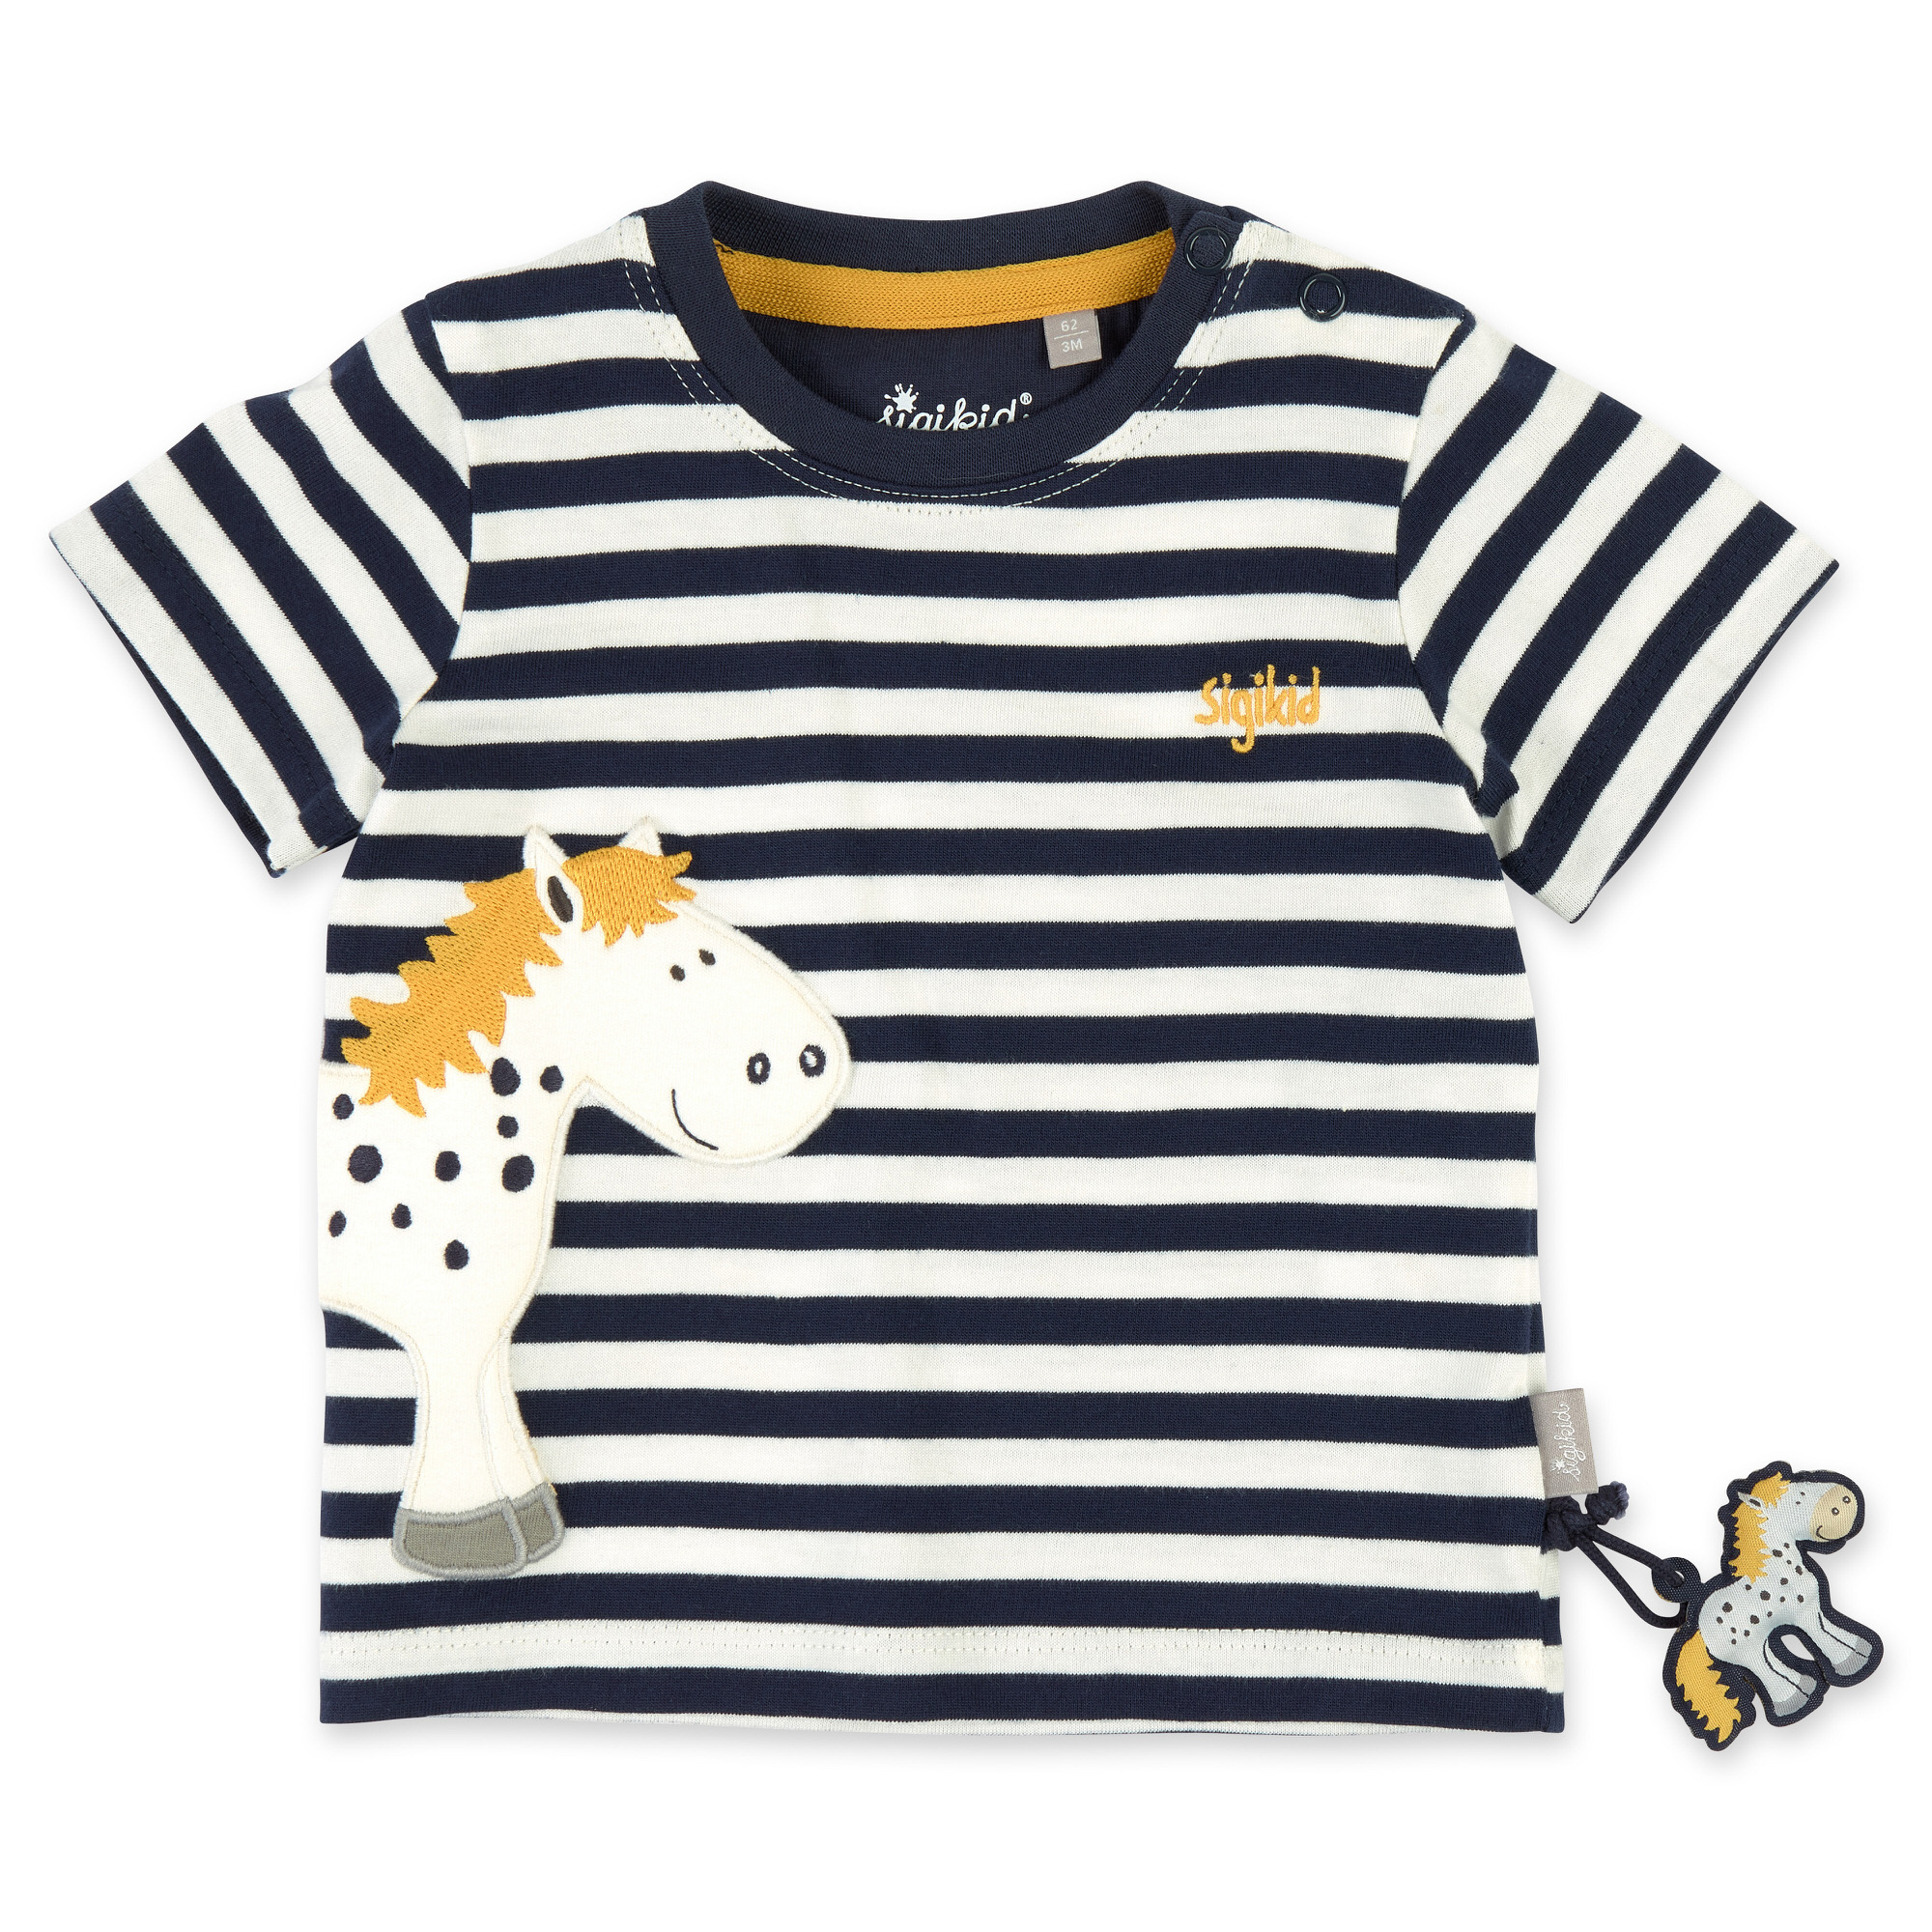 Navy/white striped baby T-shirt with pony appliqué